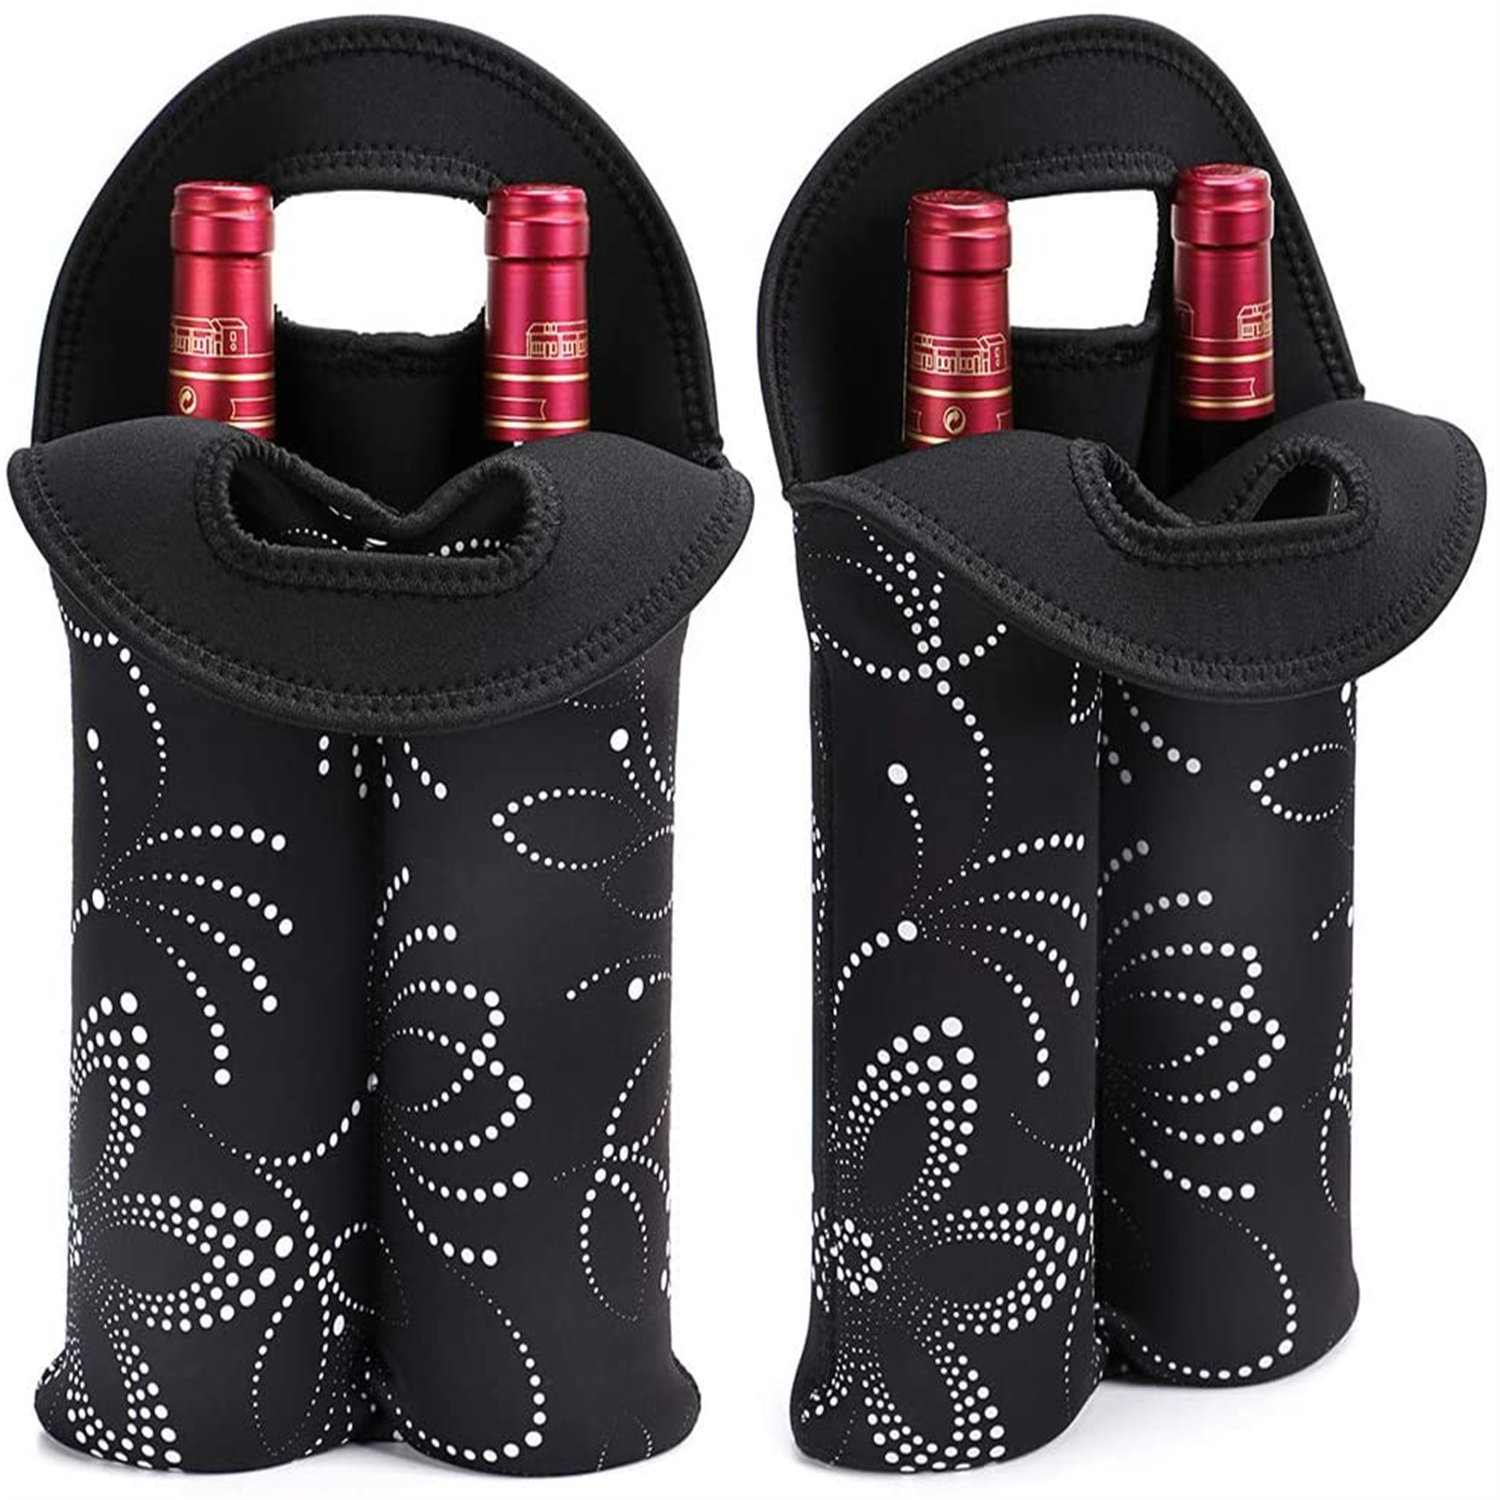 Insulated Neoprene Drink/Wine/Champagne/Beer Two Bottle Cooler Tote Bag Carrier 